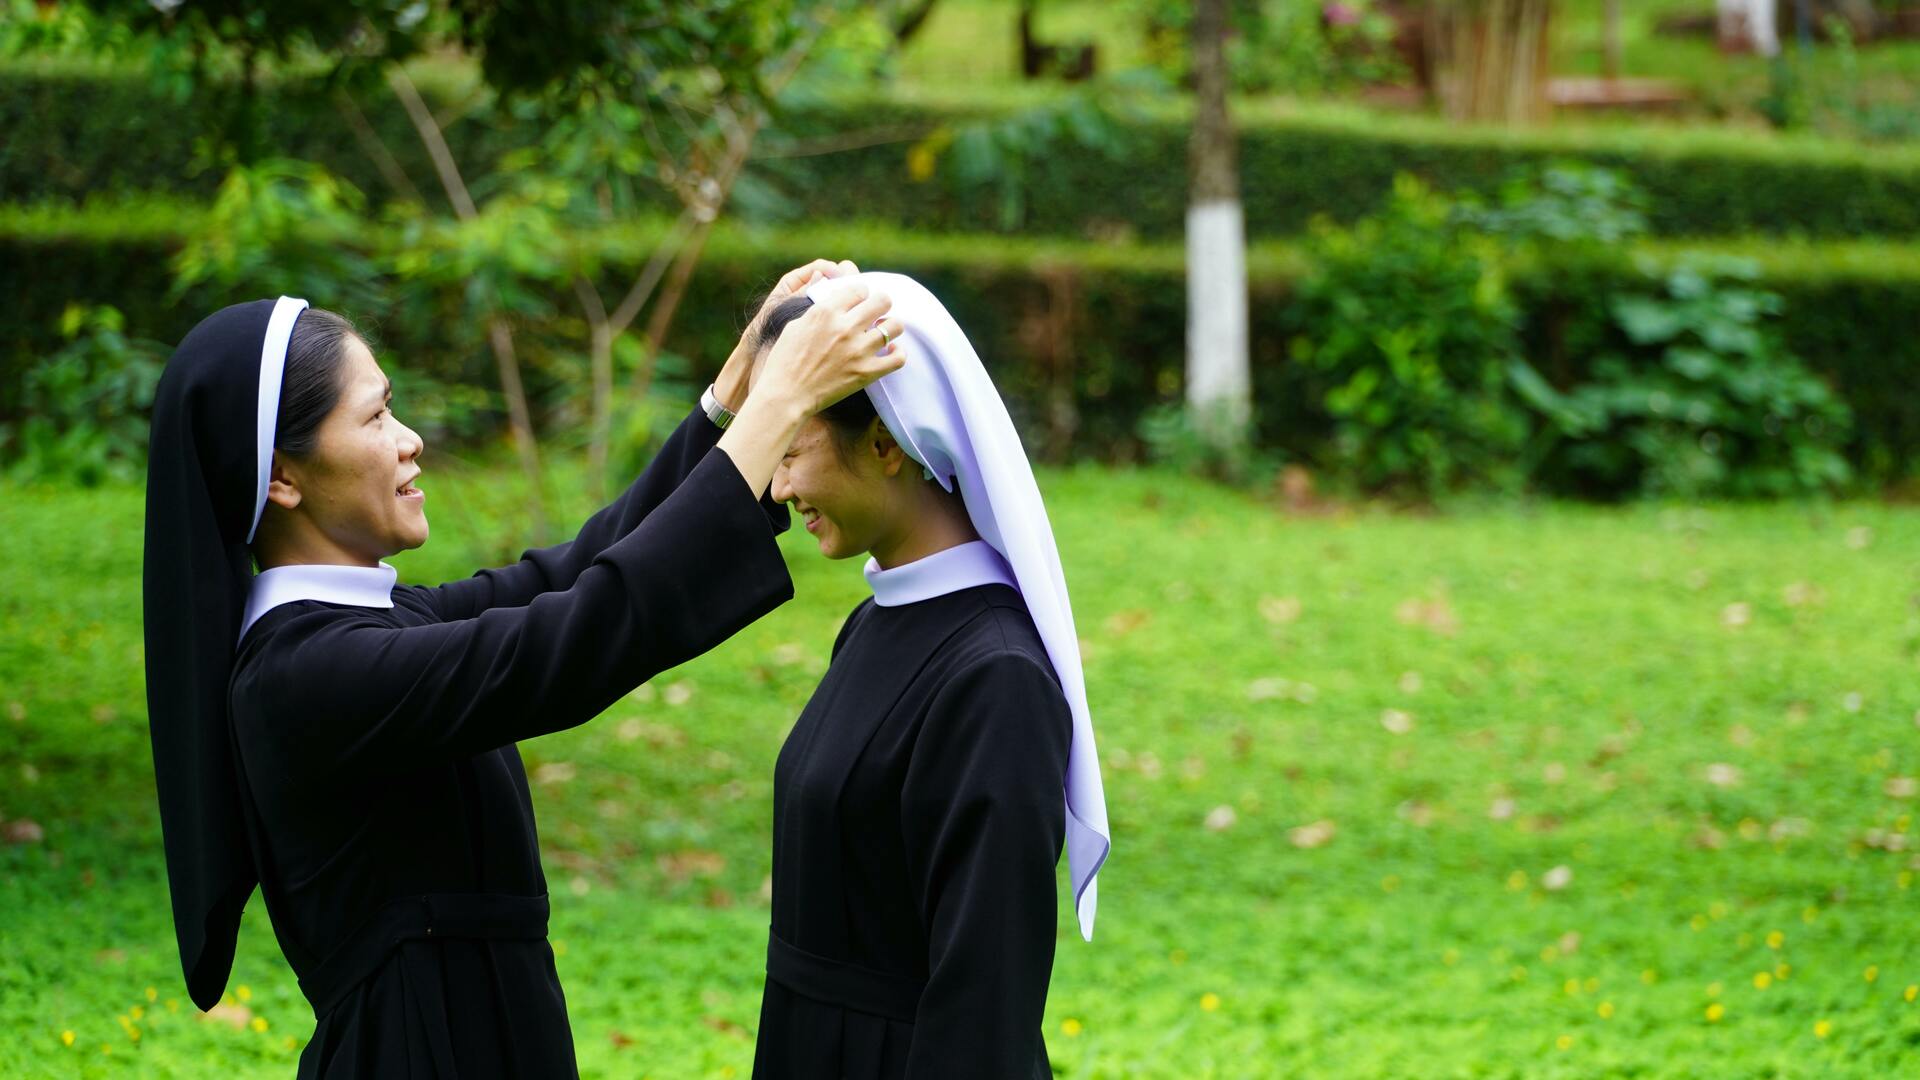 The ten nuns of the Catholic Church were excommunicated